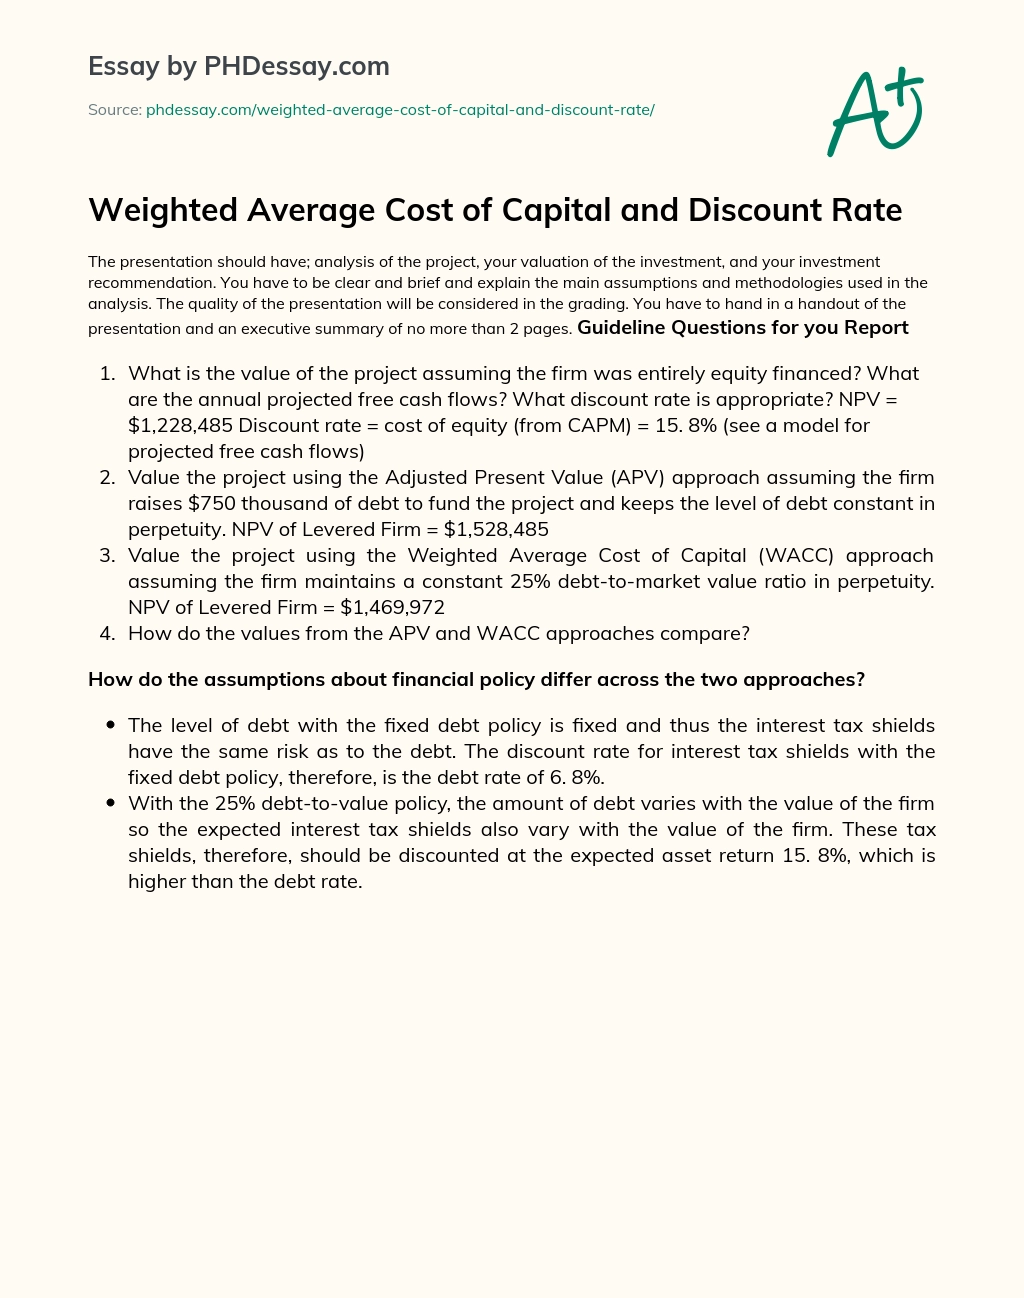 Weighted Average Cost of Capital and Discount Rate essay